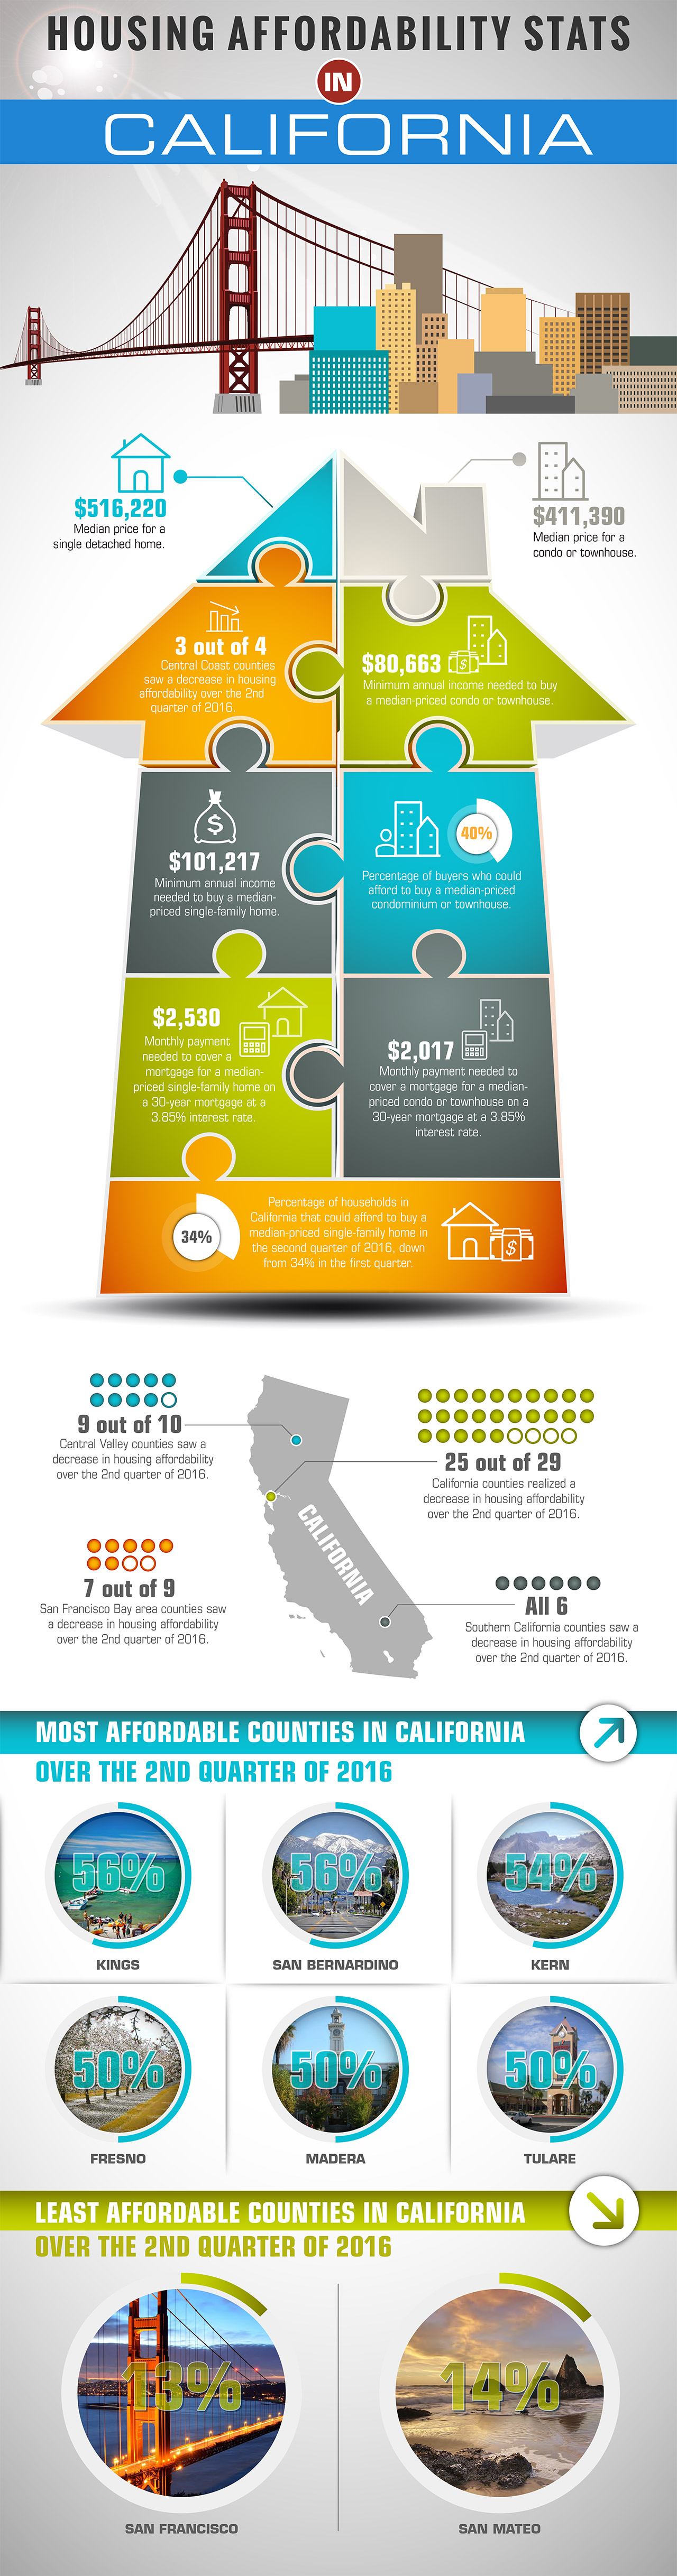 housing-affordability-stats-in-california-infographic